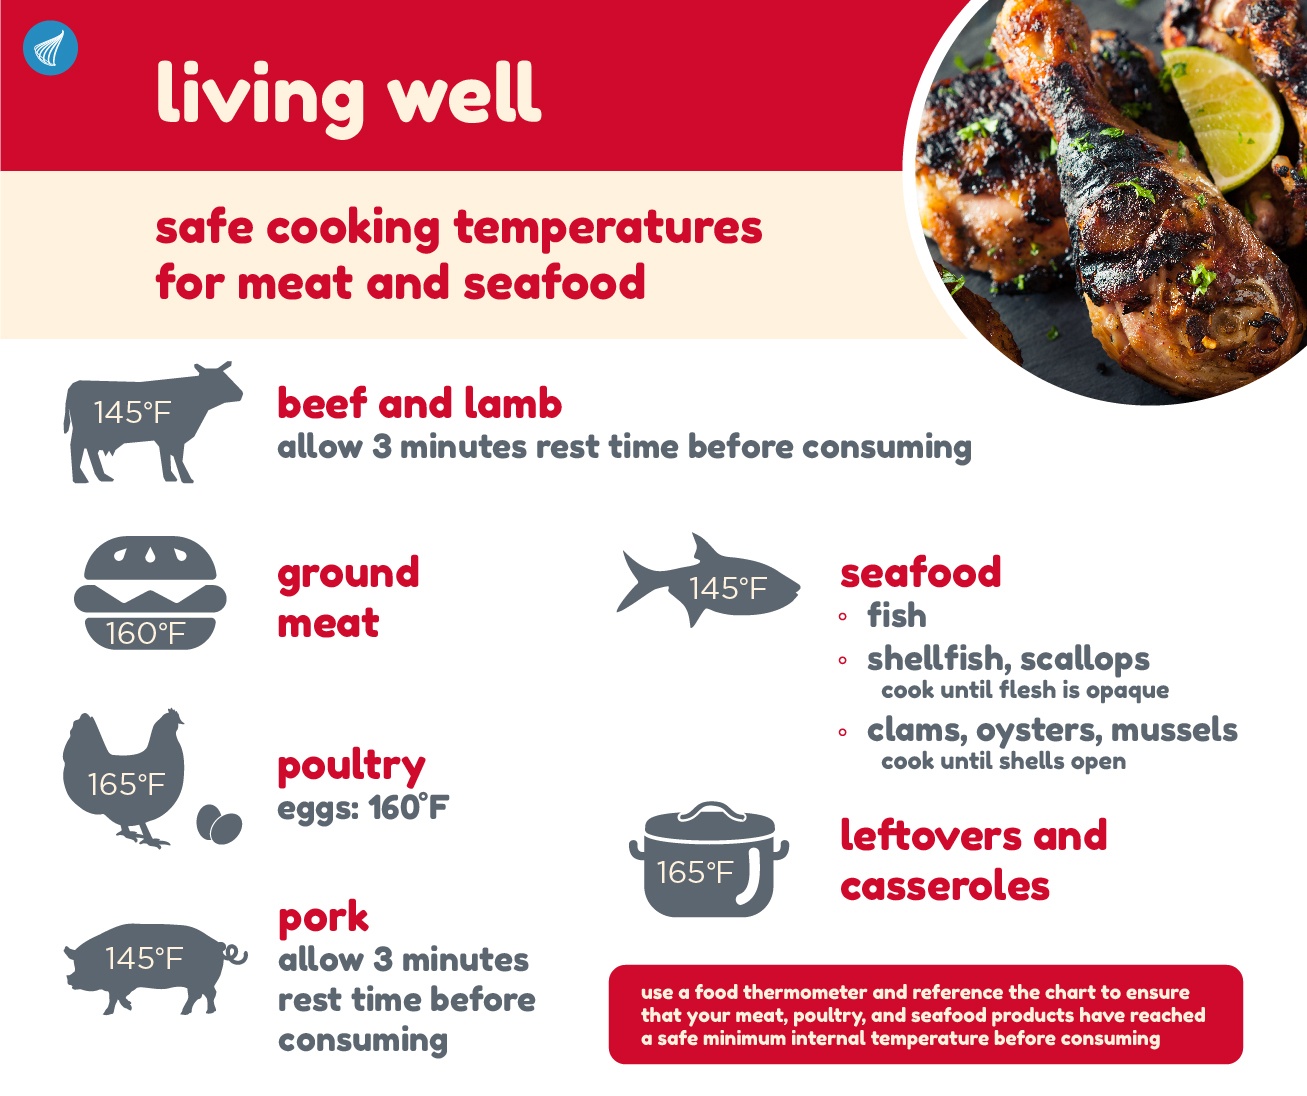 Safe Cooking Temperatures for Meat and Seafood